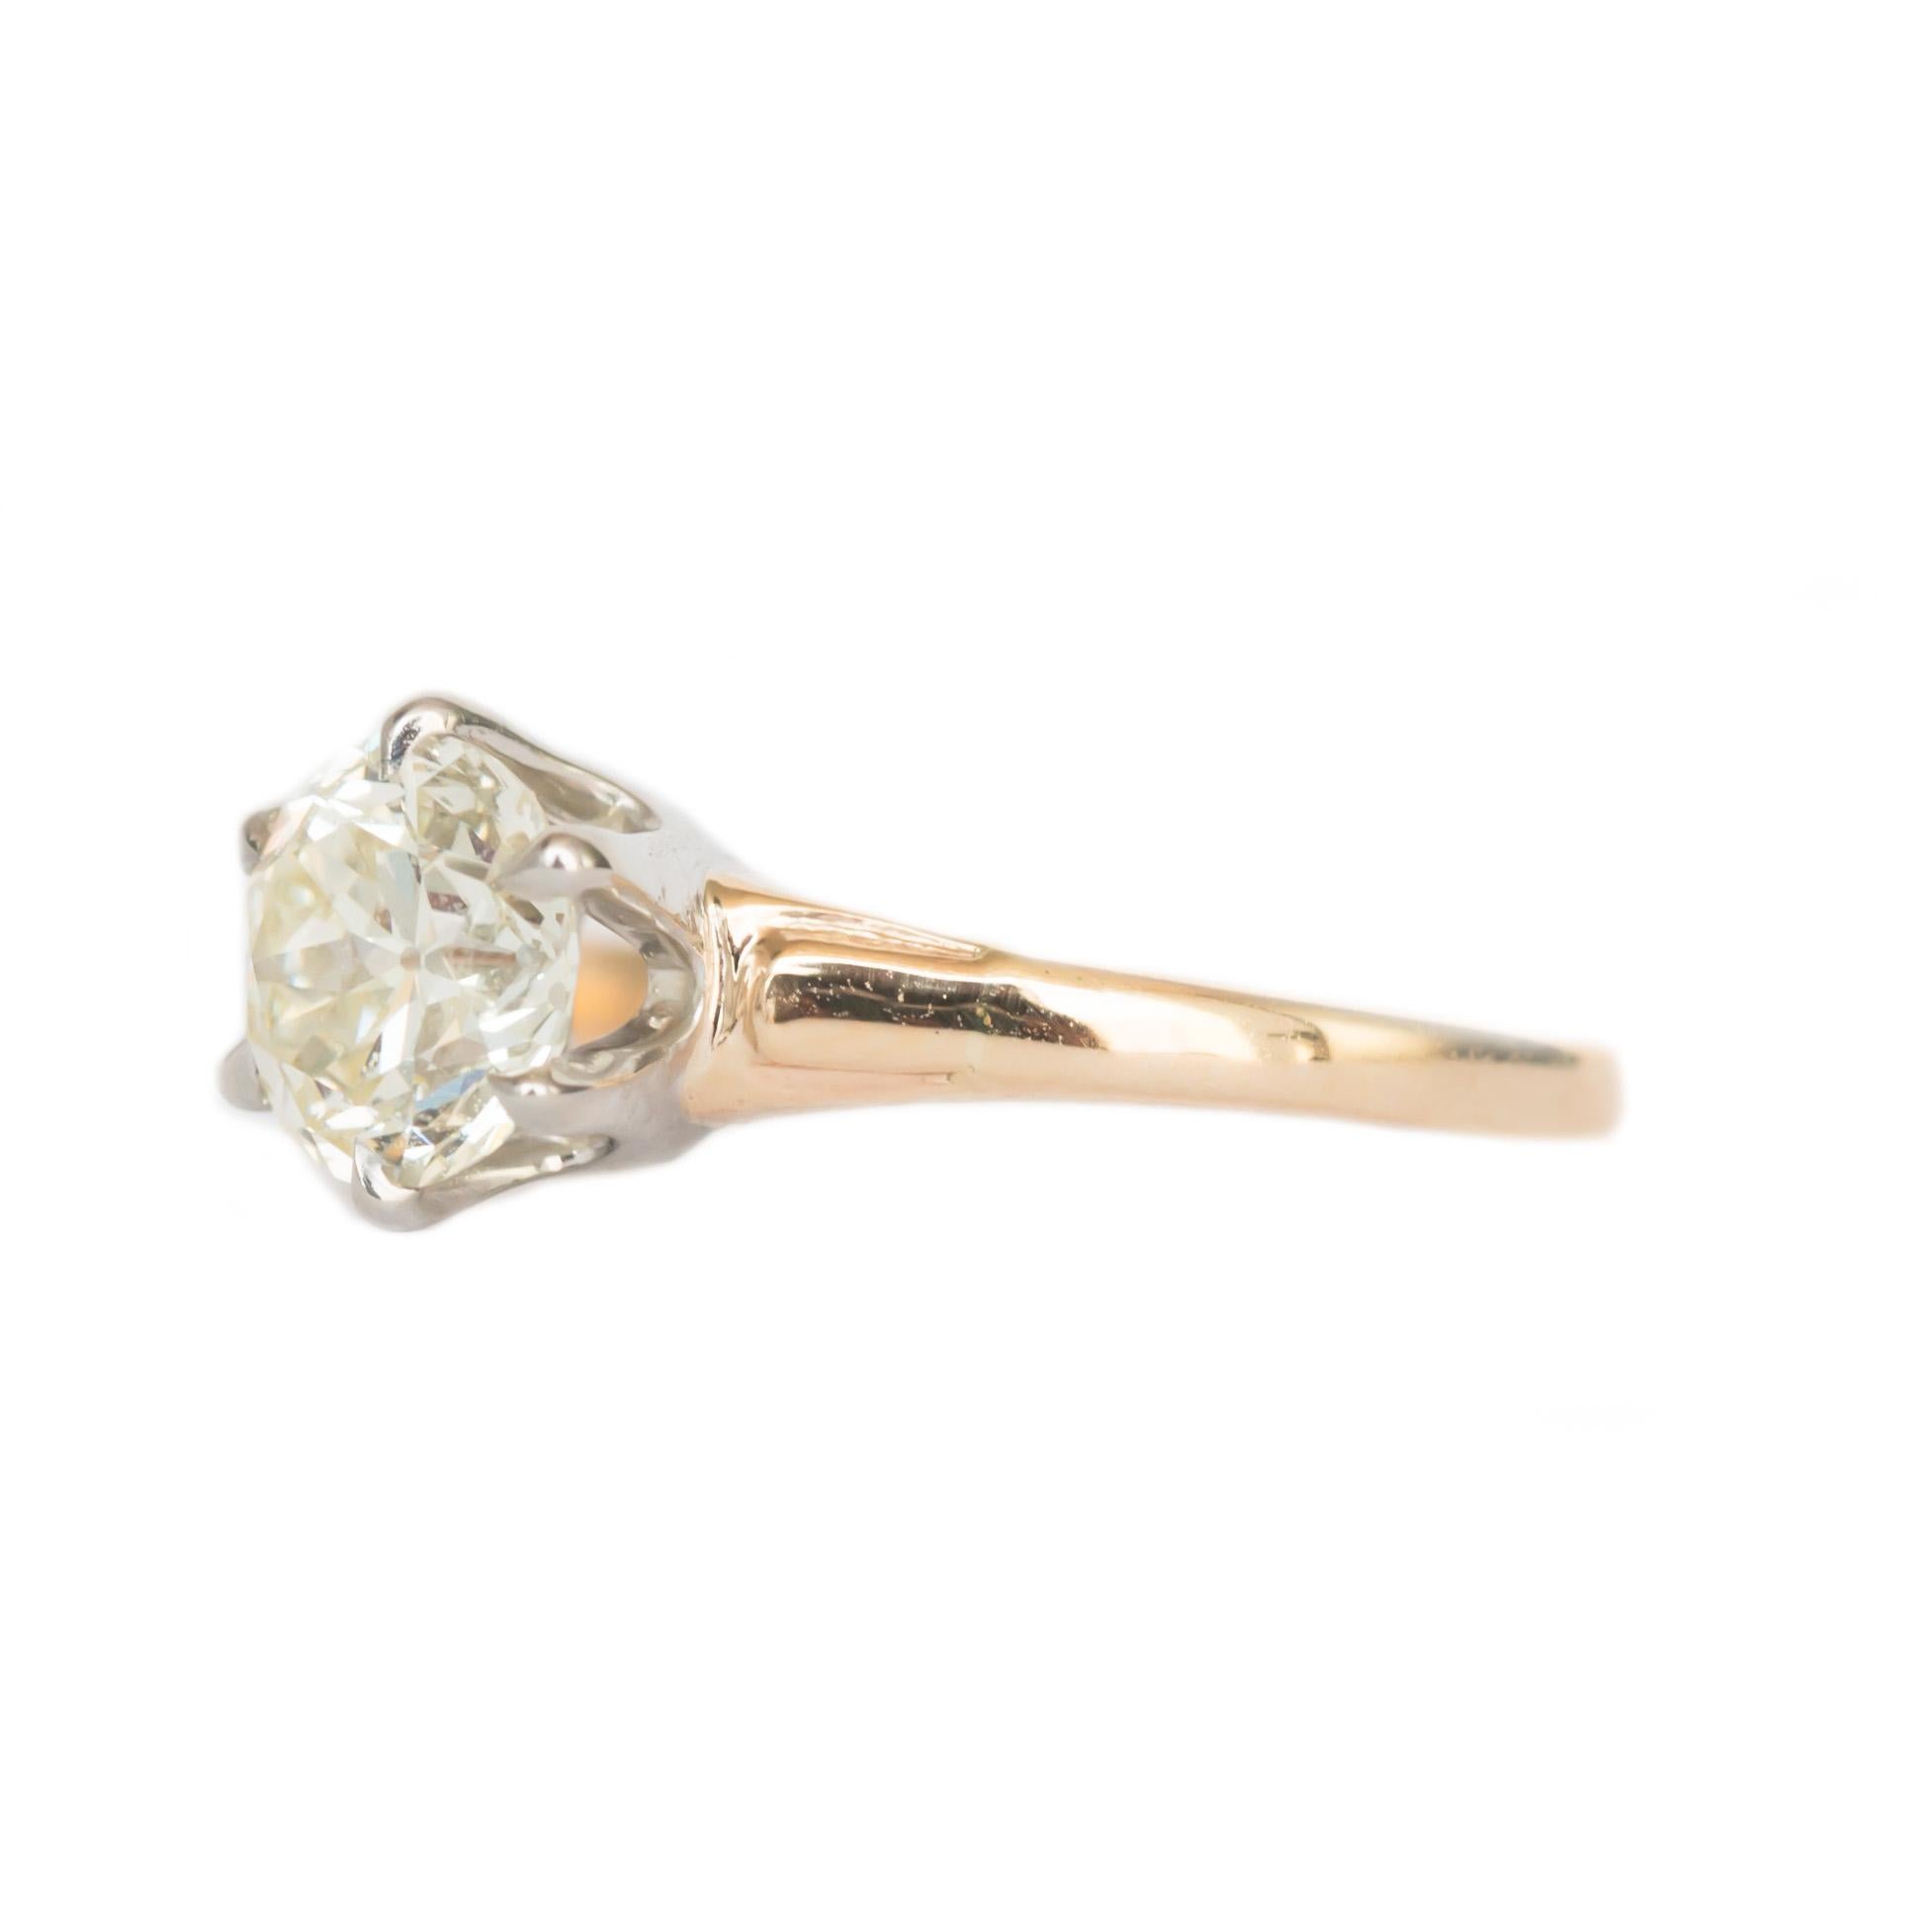 Item Details: 
Ring Size: 6
Metal Type: 14 karat Yellow Gold & Platinum Prongs [Tested and Hallmarked]
Weight: 3 grams

Center Stone Details:
Weight: 1.05 carat
Cut: Old European Brilliant
Color: L
Clarity: VS2


Finger to Top of Stone Measurement: